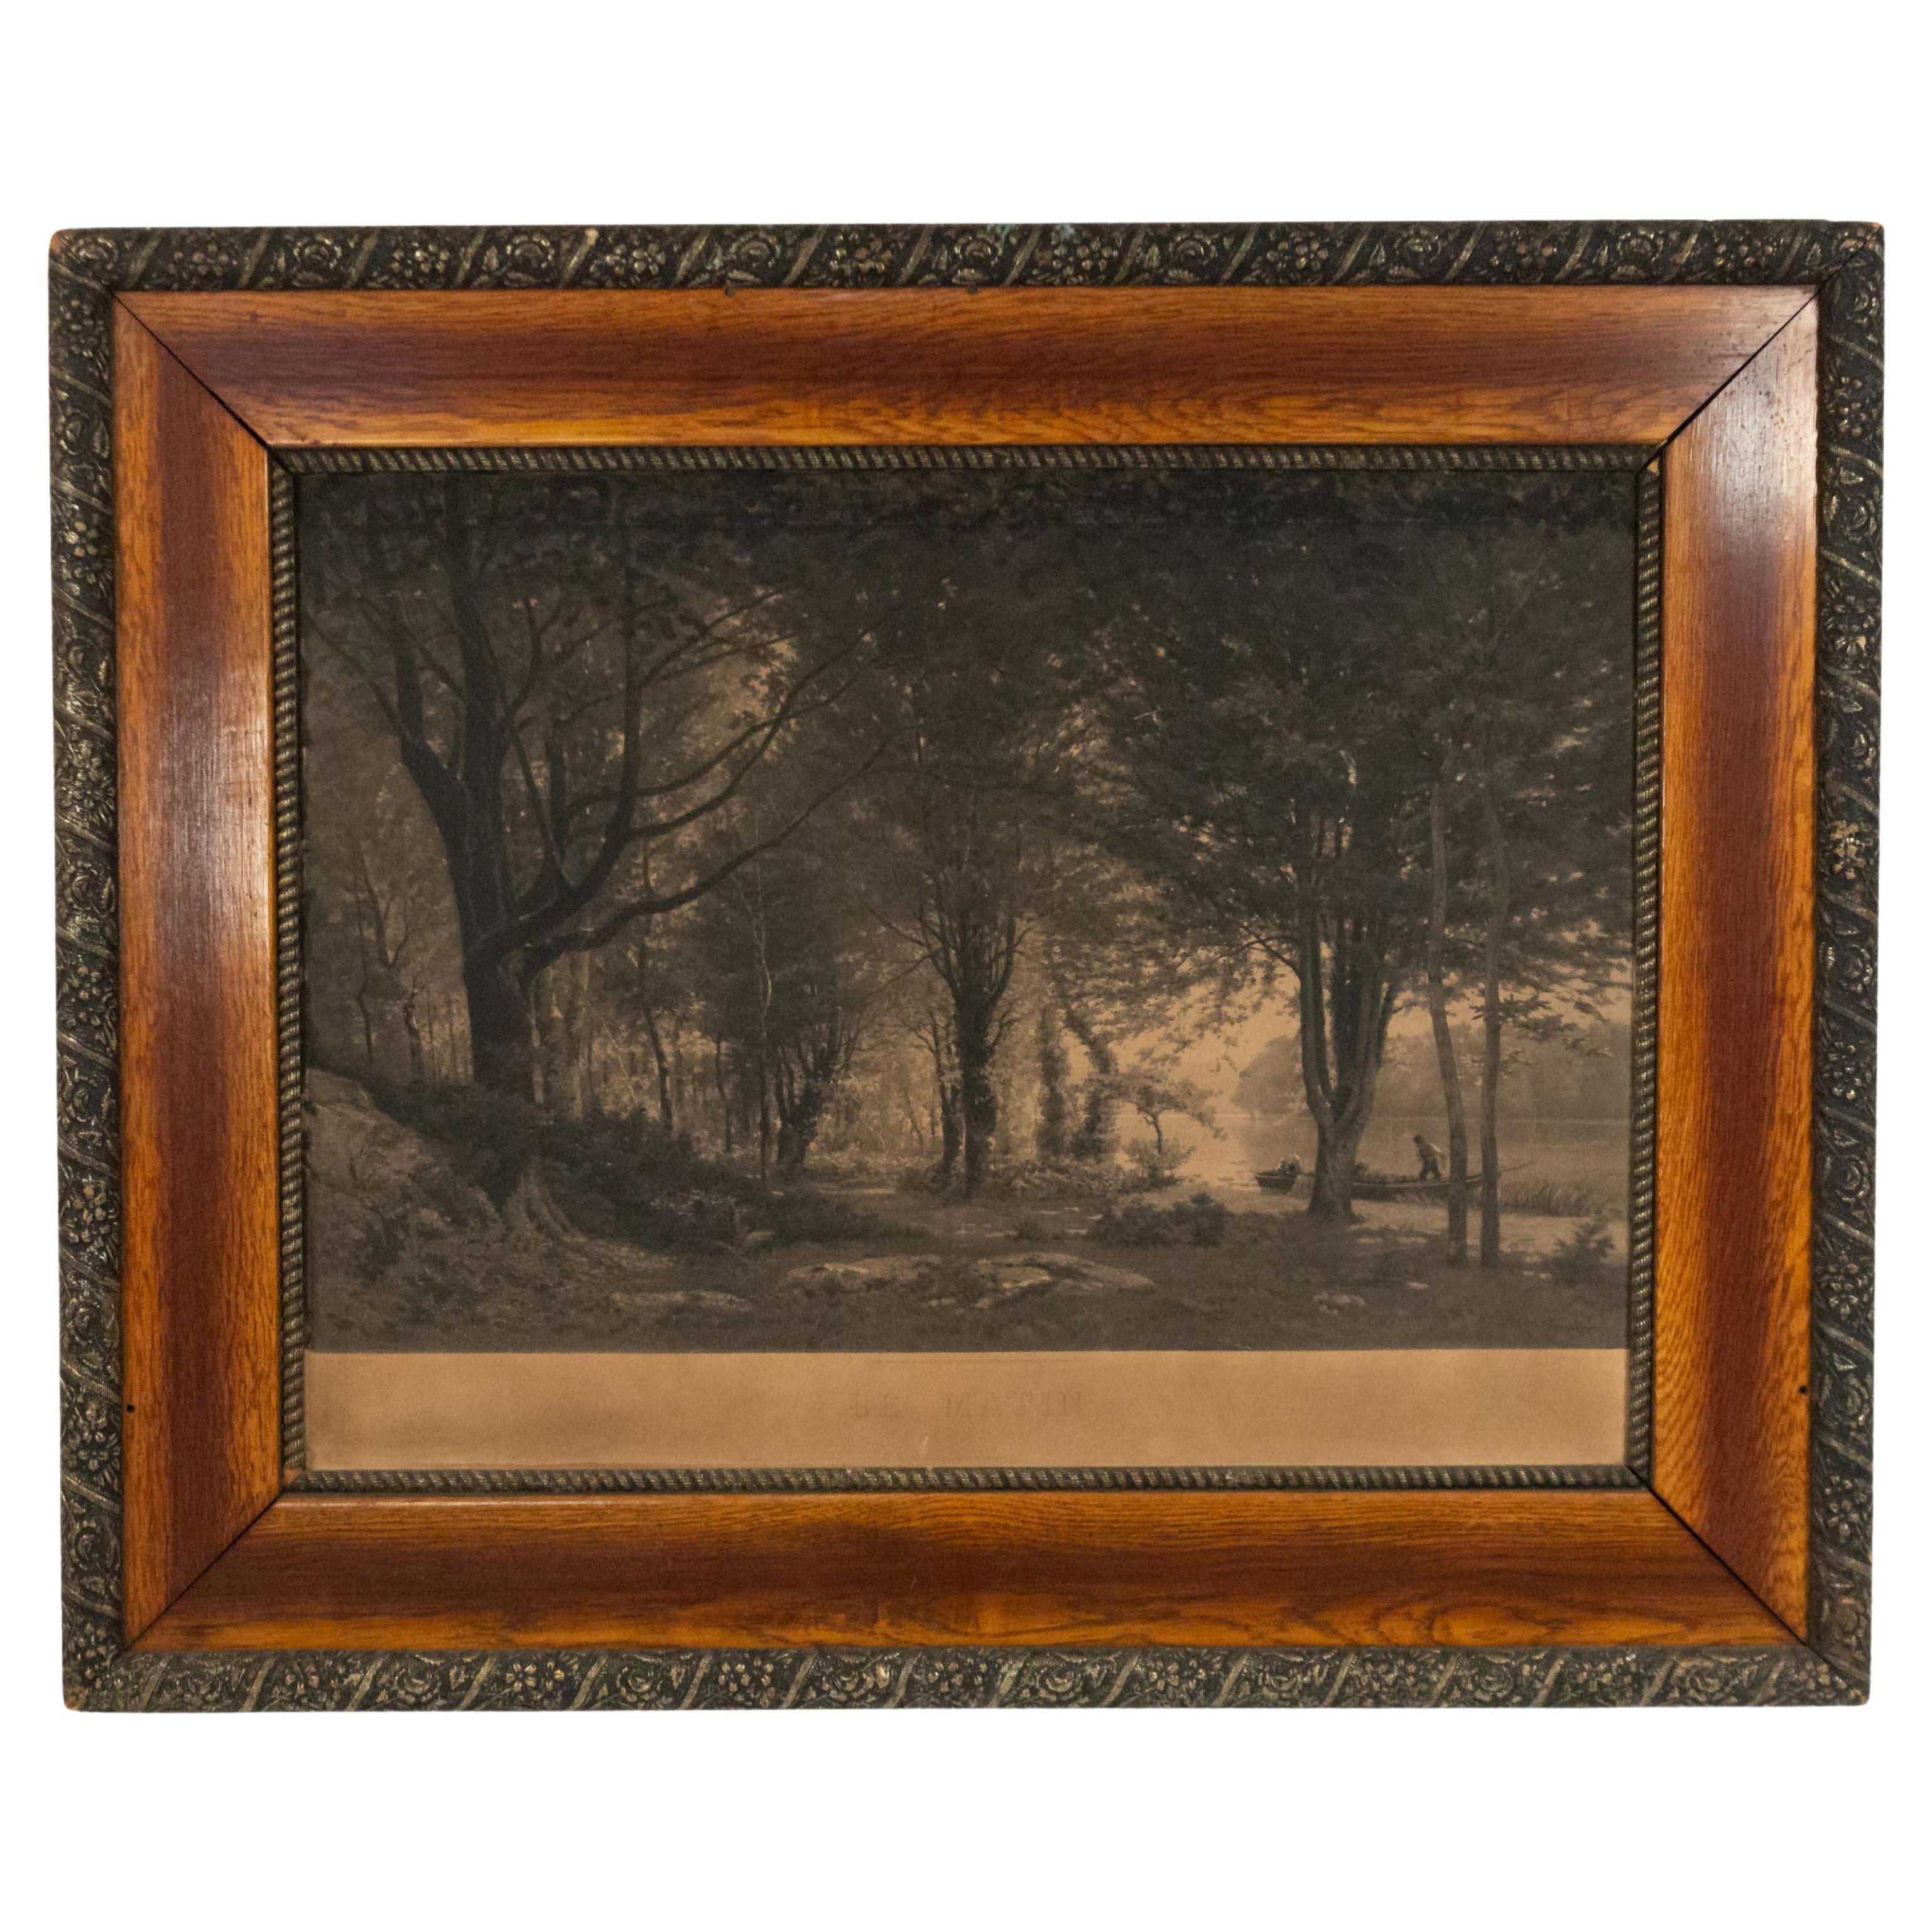 French Victorian Framed Engraving of a Landscape "Le Matin"